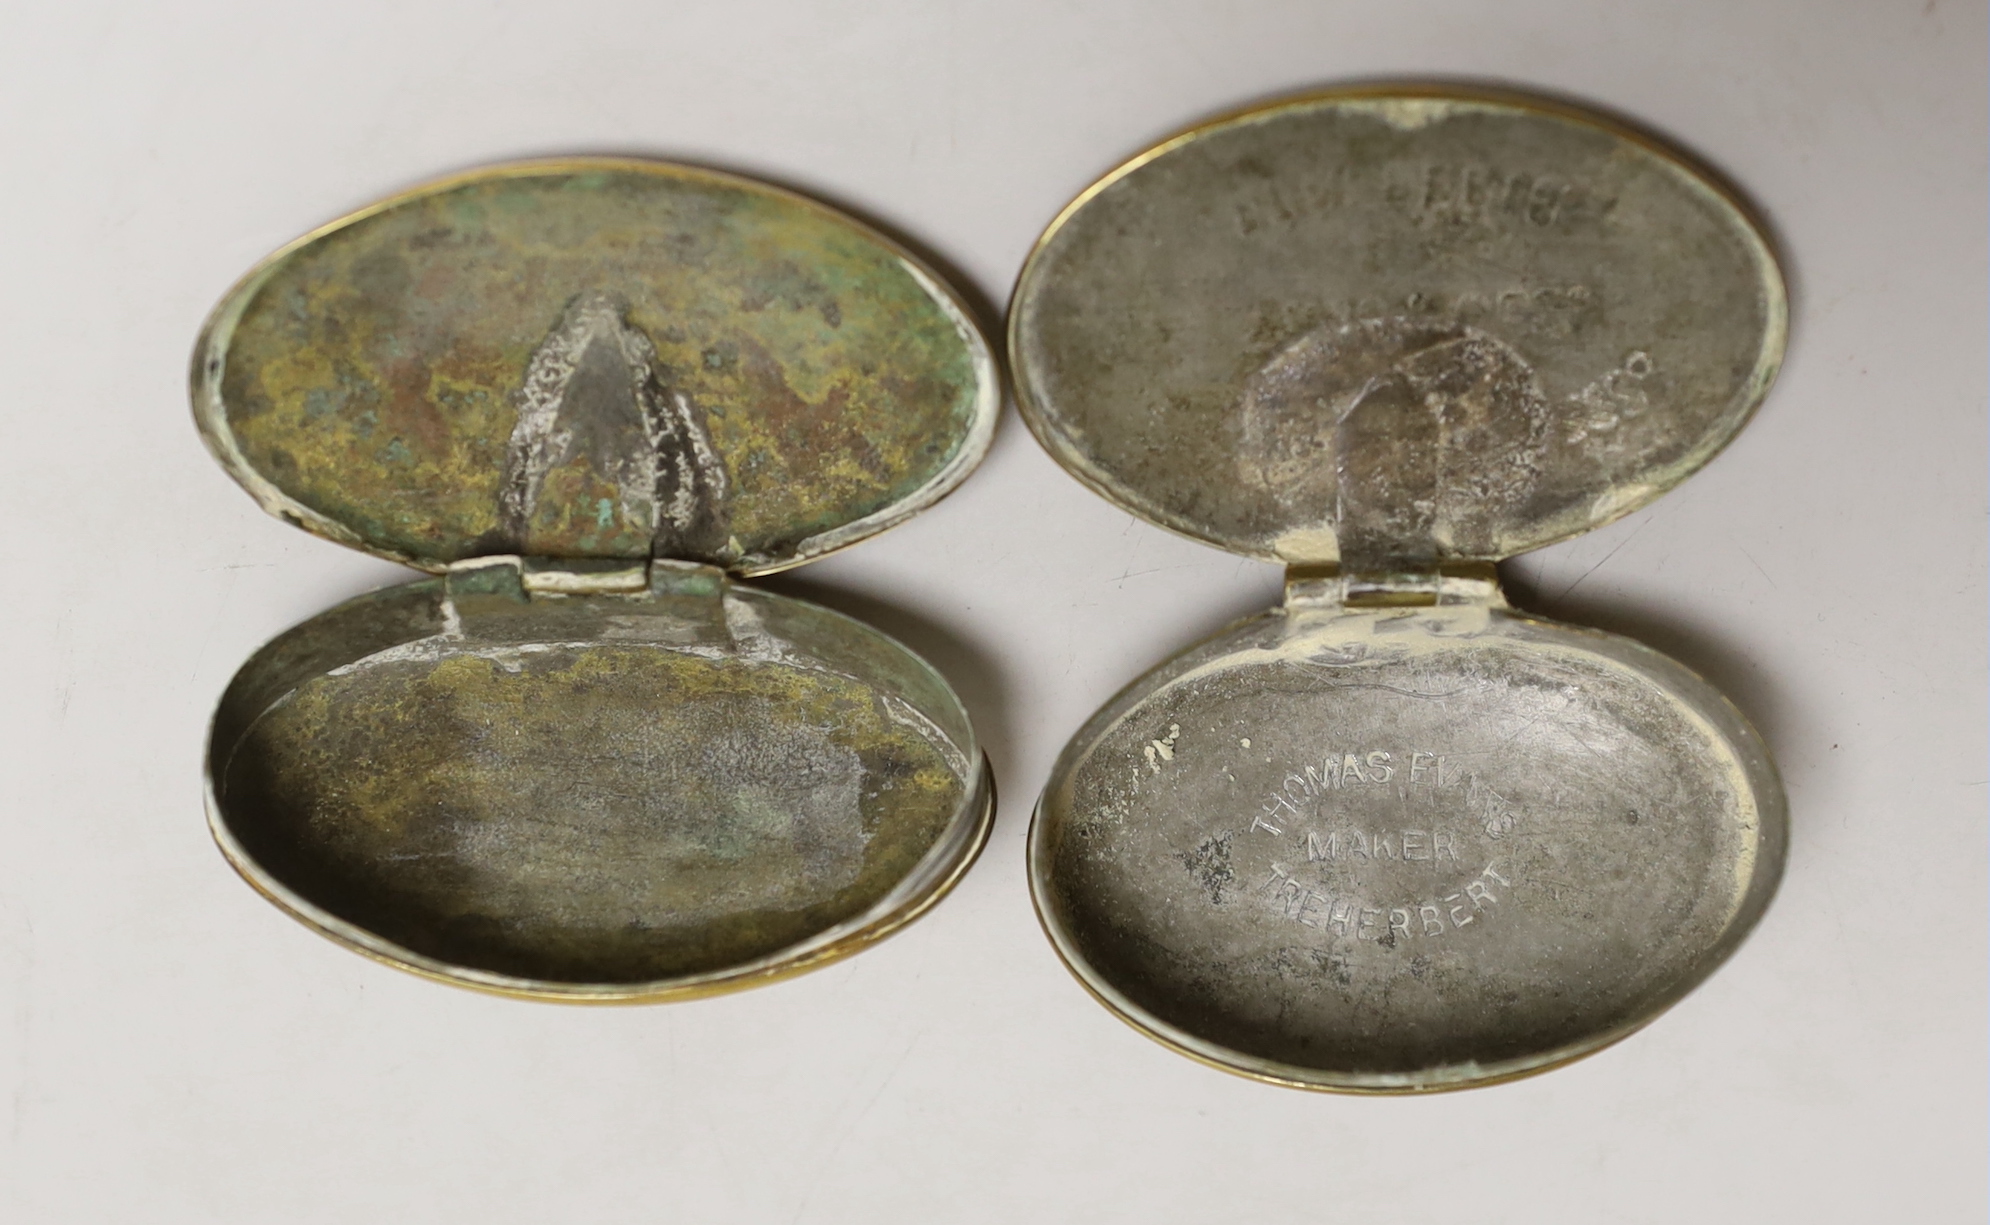 Two early 20th century brass miners’ snuff boxes, one with Welsh inscription